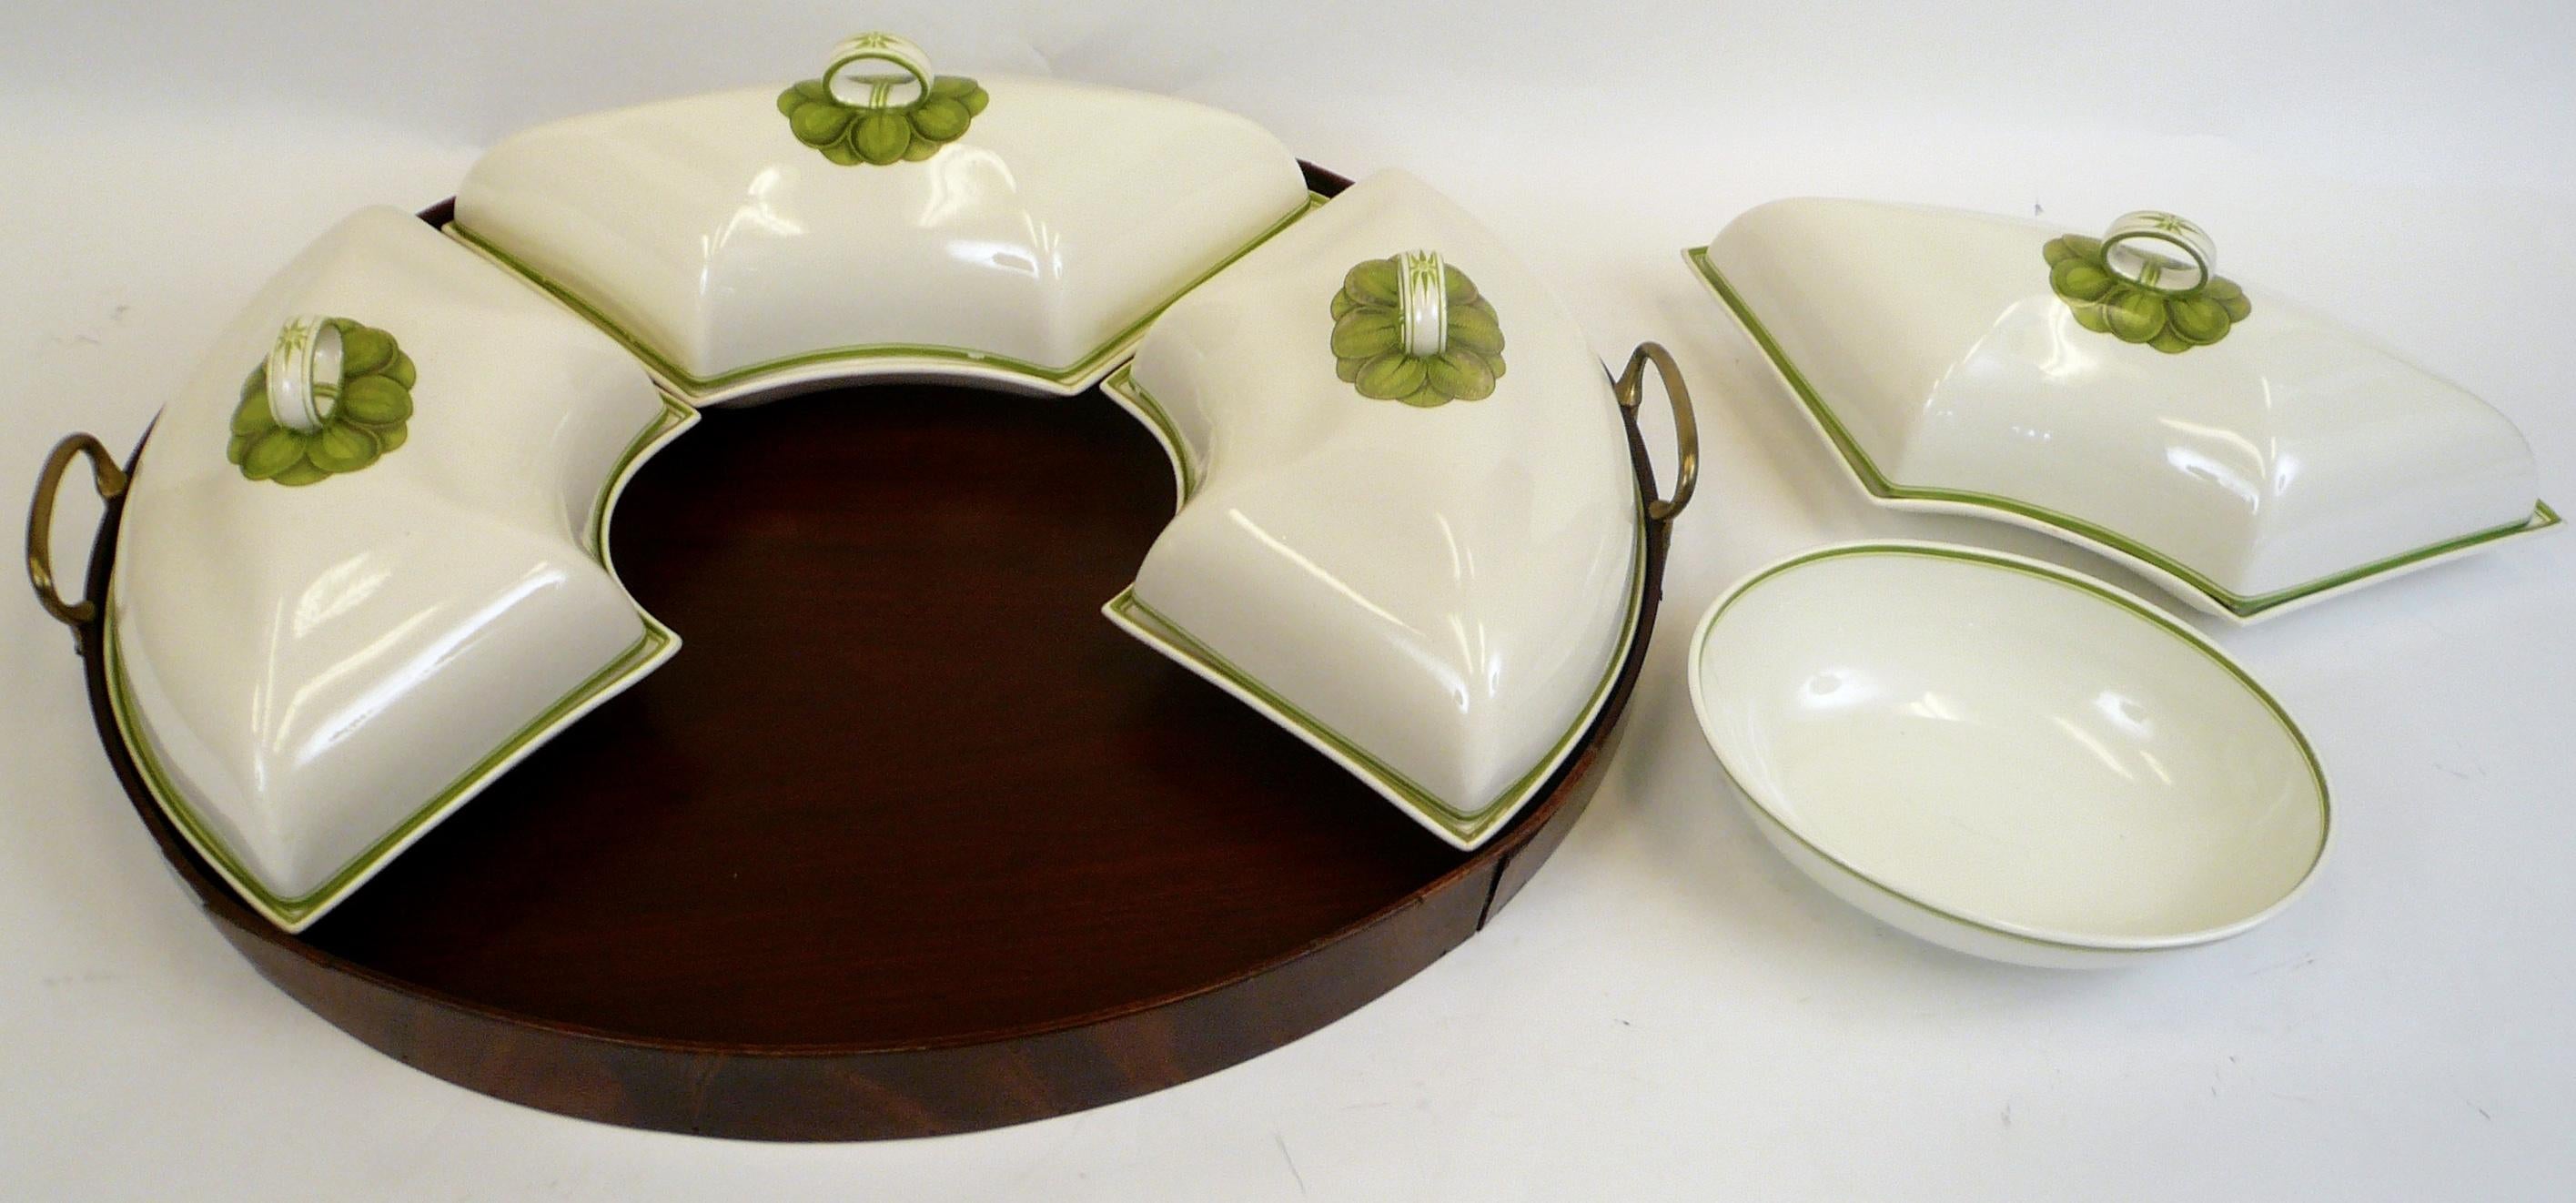 Rare and Impressive Early 19th Century Wedgwood Creamware Breakfast Set For Sale 4